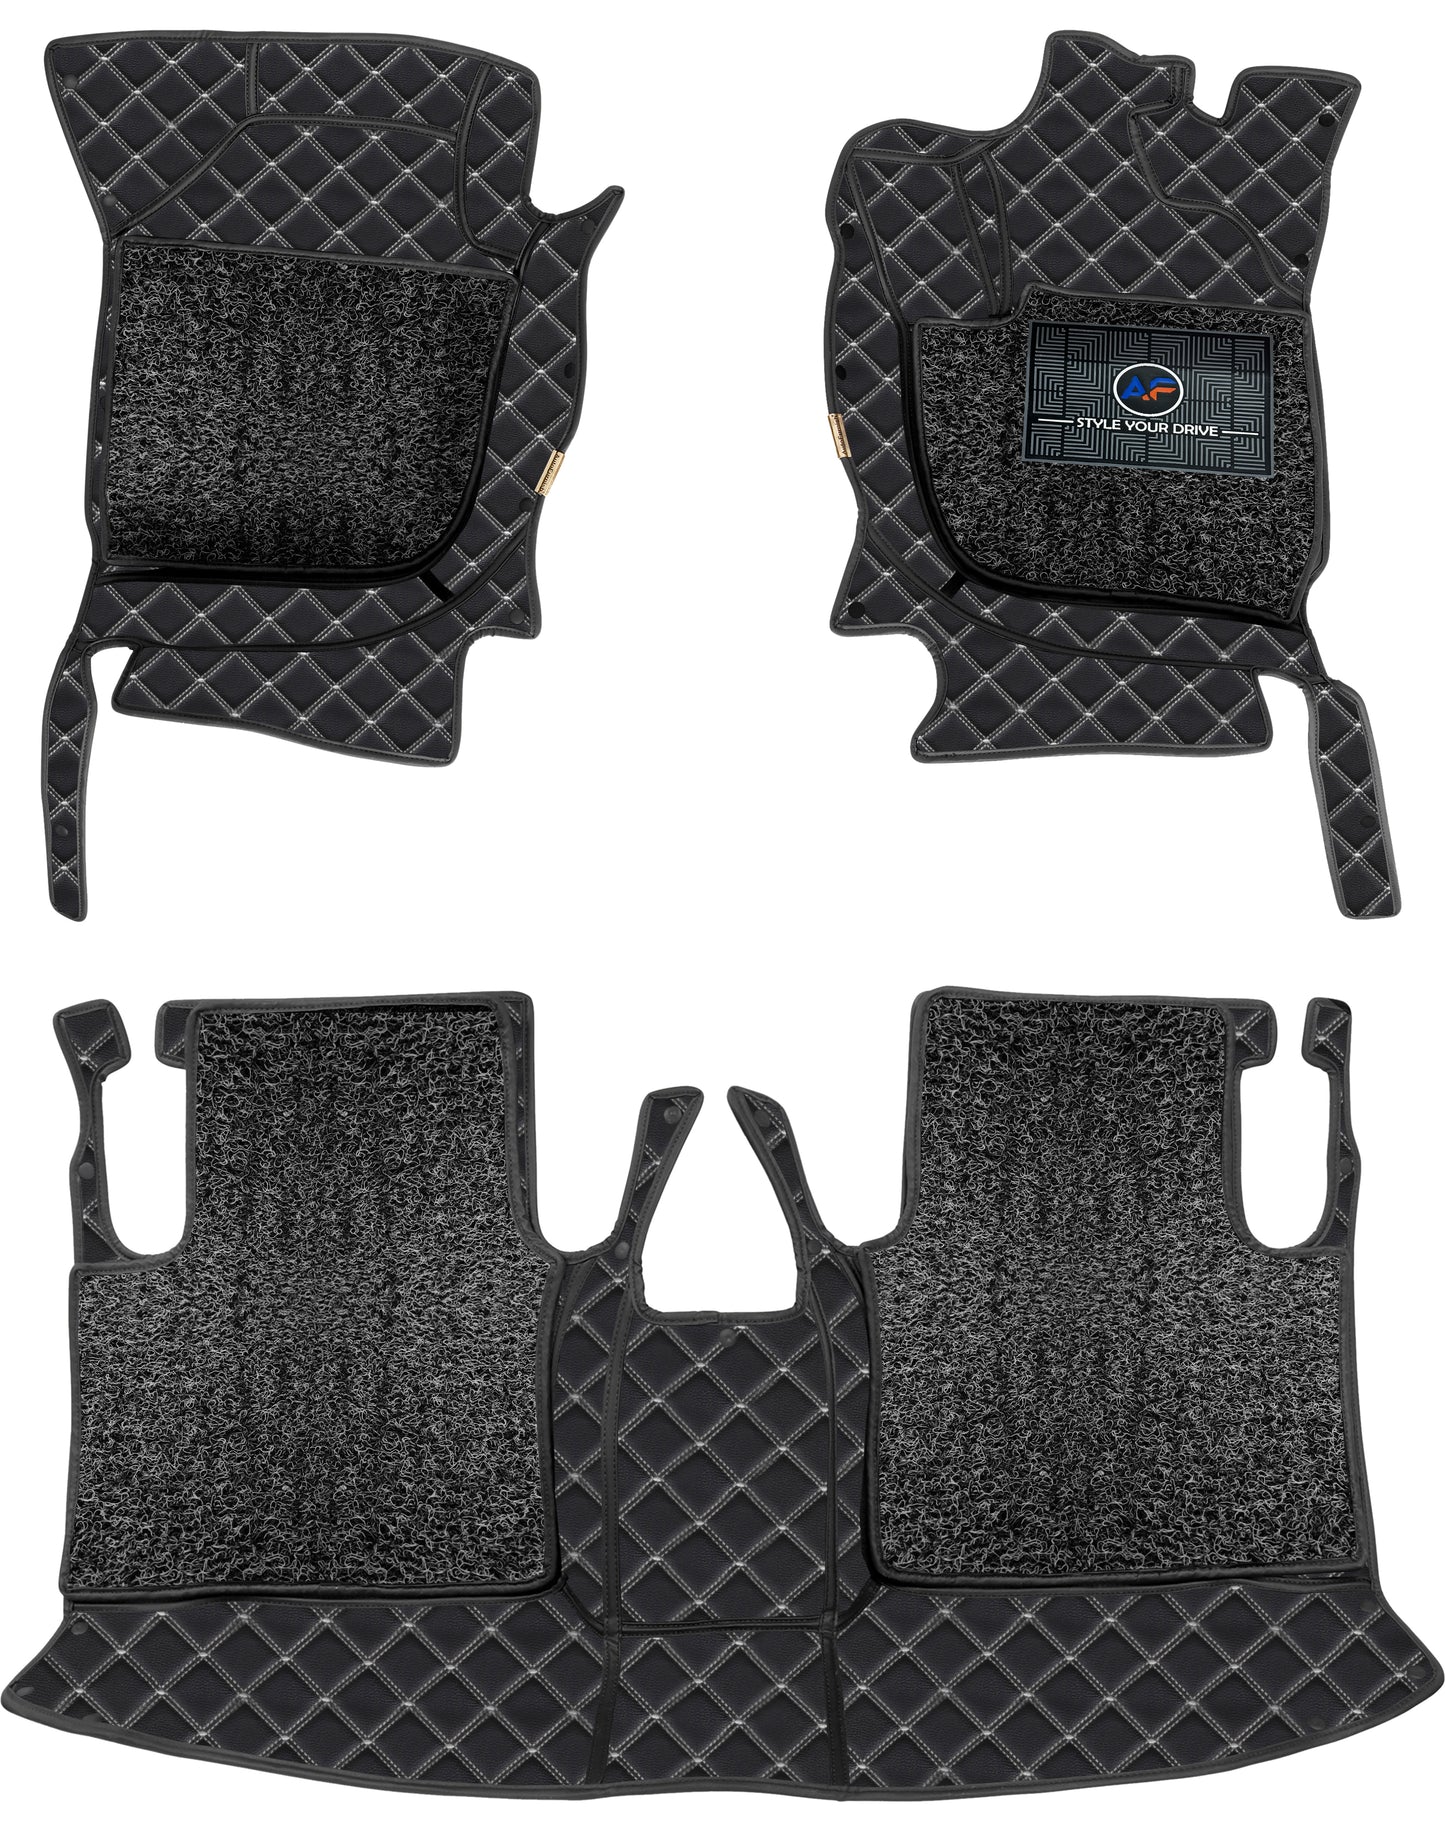 Nissan Terrano 2013-20-7D Luxury Car Mat, All Weather Proof, Anti-Skid, 100% Waterproof & Odorless with Unique Diamond Fish Design (24mm Luxury PU Leather, 2 Rows)